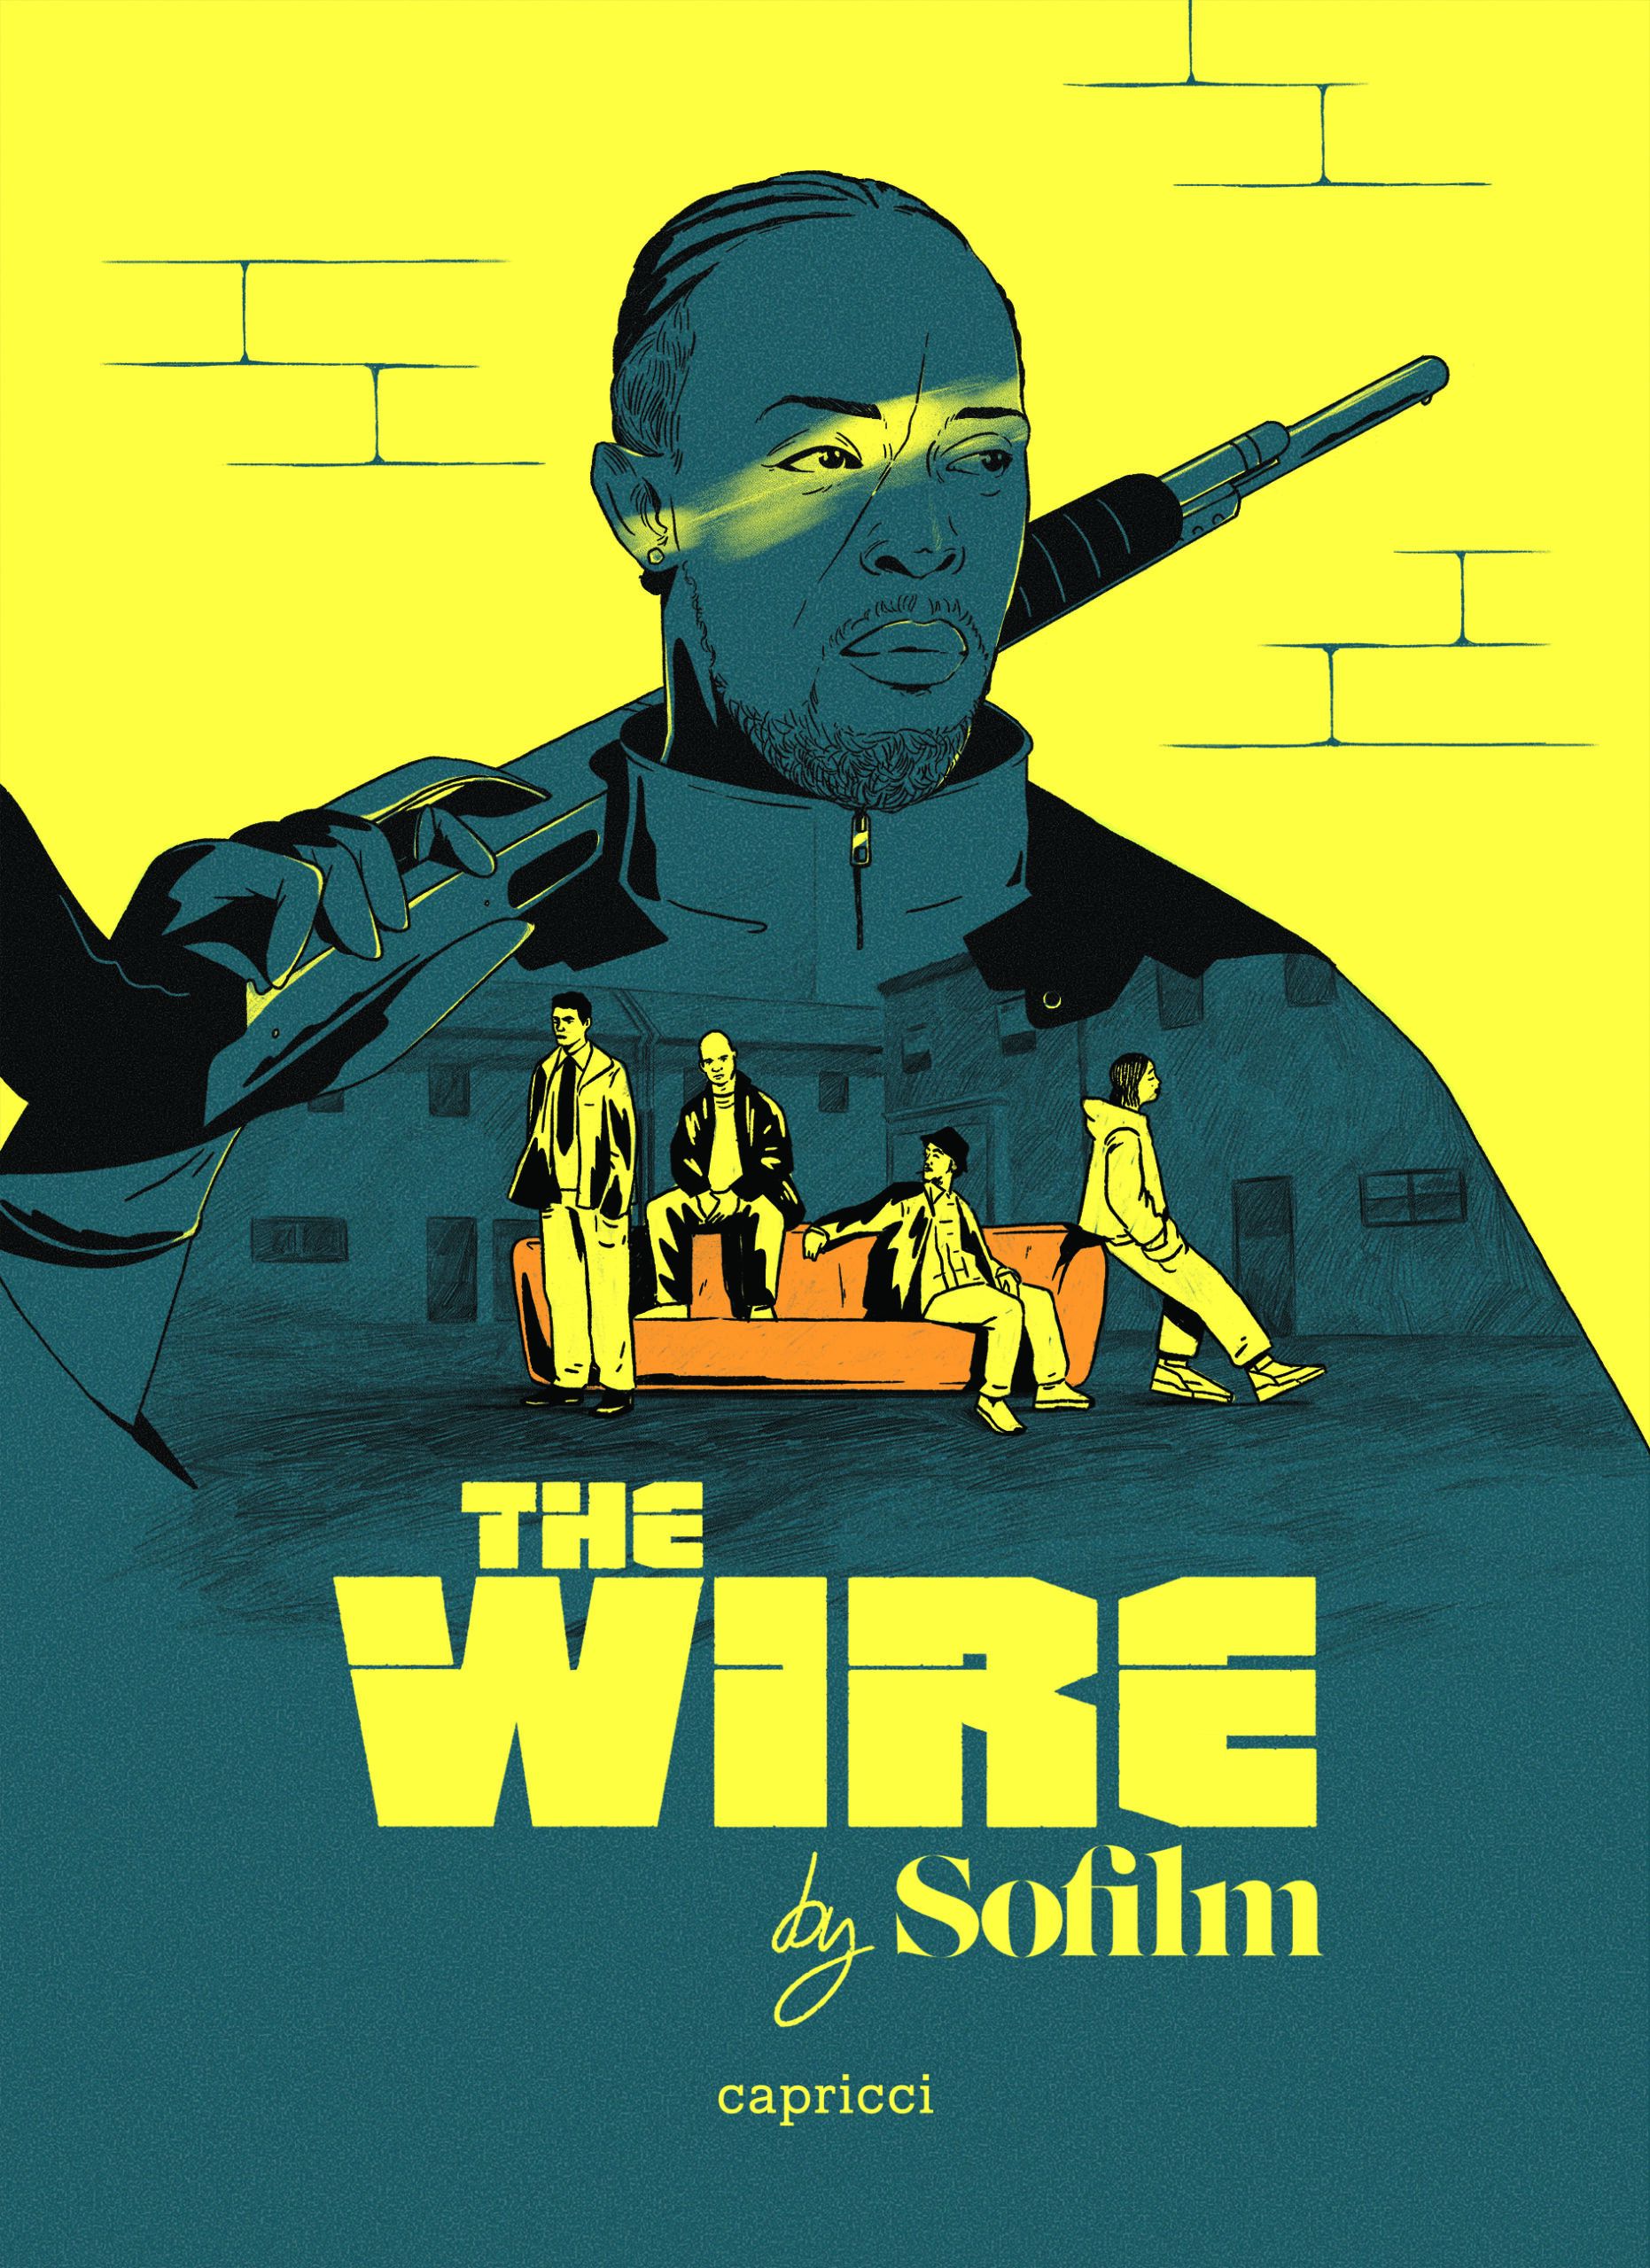 THE WIRE by Sofilm - sofilm